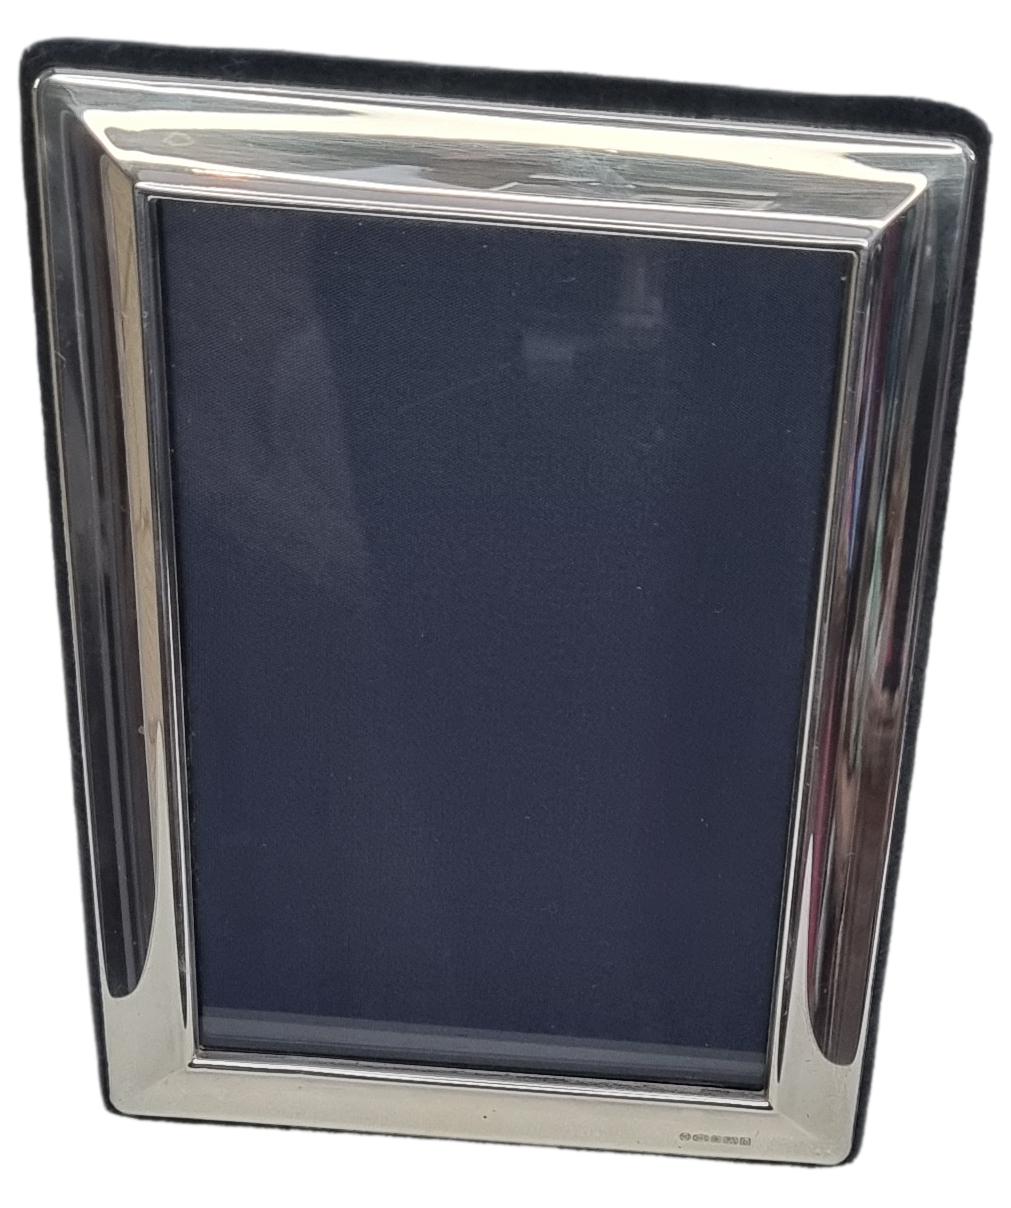 The silver photo frame is by Carrs and has a hallmark of Sheffield 2001. The frame has a blue velvet back with an easel stand. The frame is ready for use and would be an excellent gift idea for Christmas. Main photo of photo frame shown from the front.